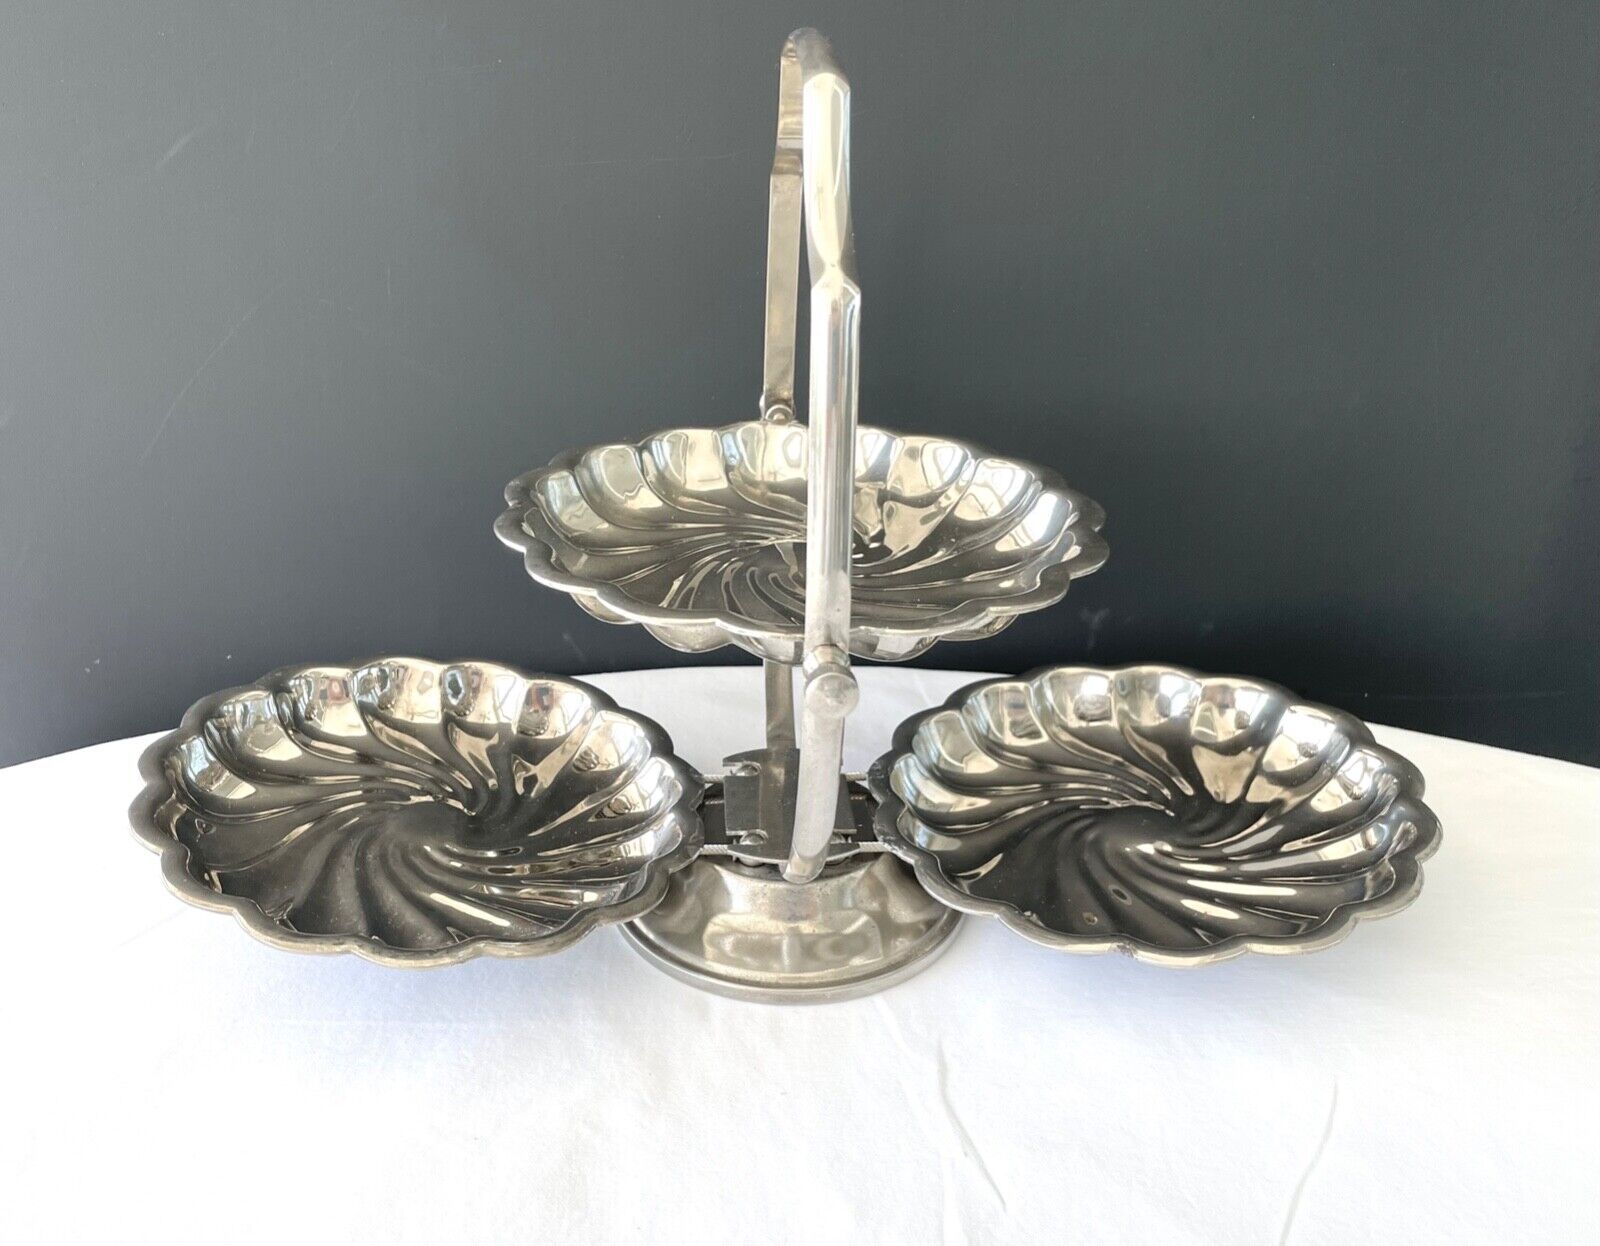 Vintage Silver Plate Clamshell 3 Tier Folding Serving Tray Tea Cake Stand Nuts